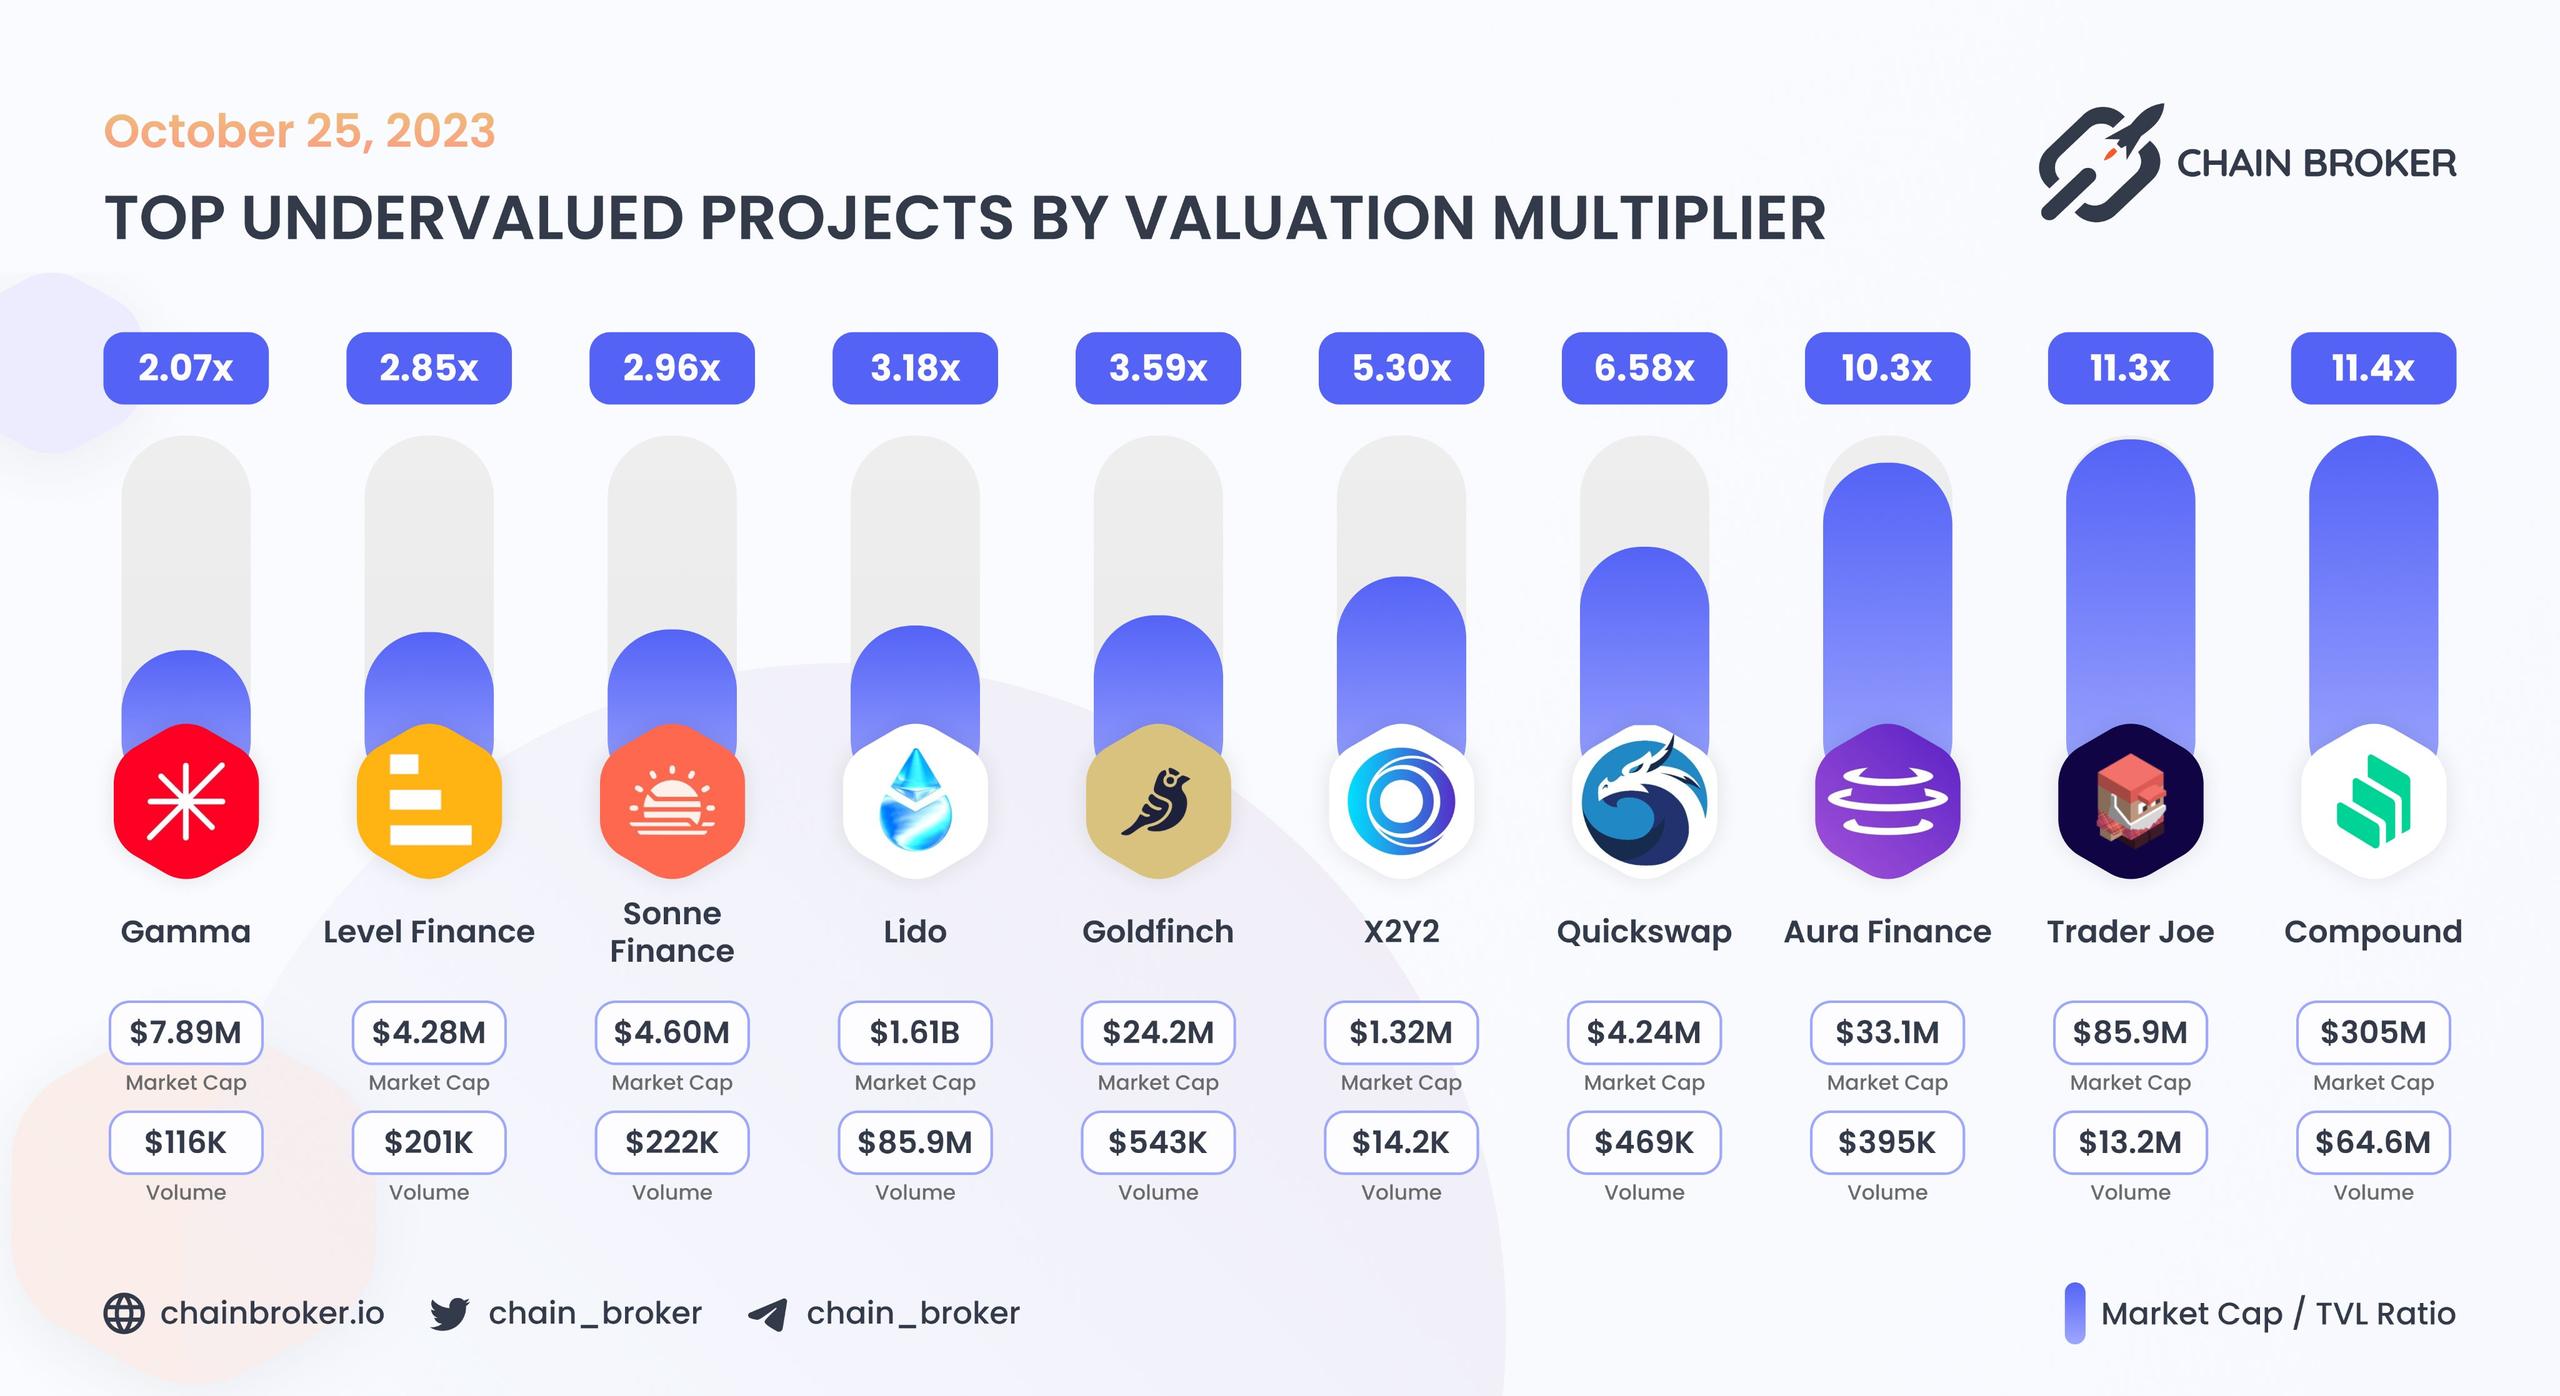 Top undervalued projects by valuation multiplier